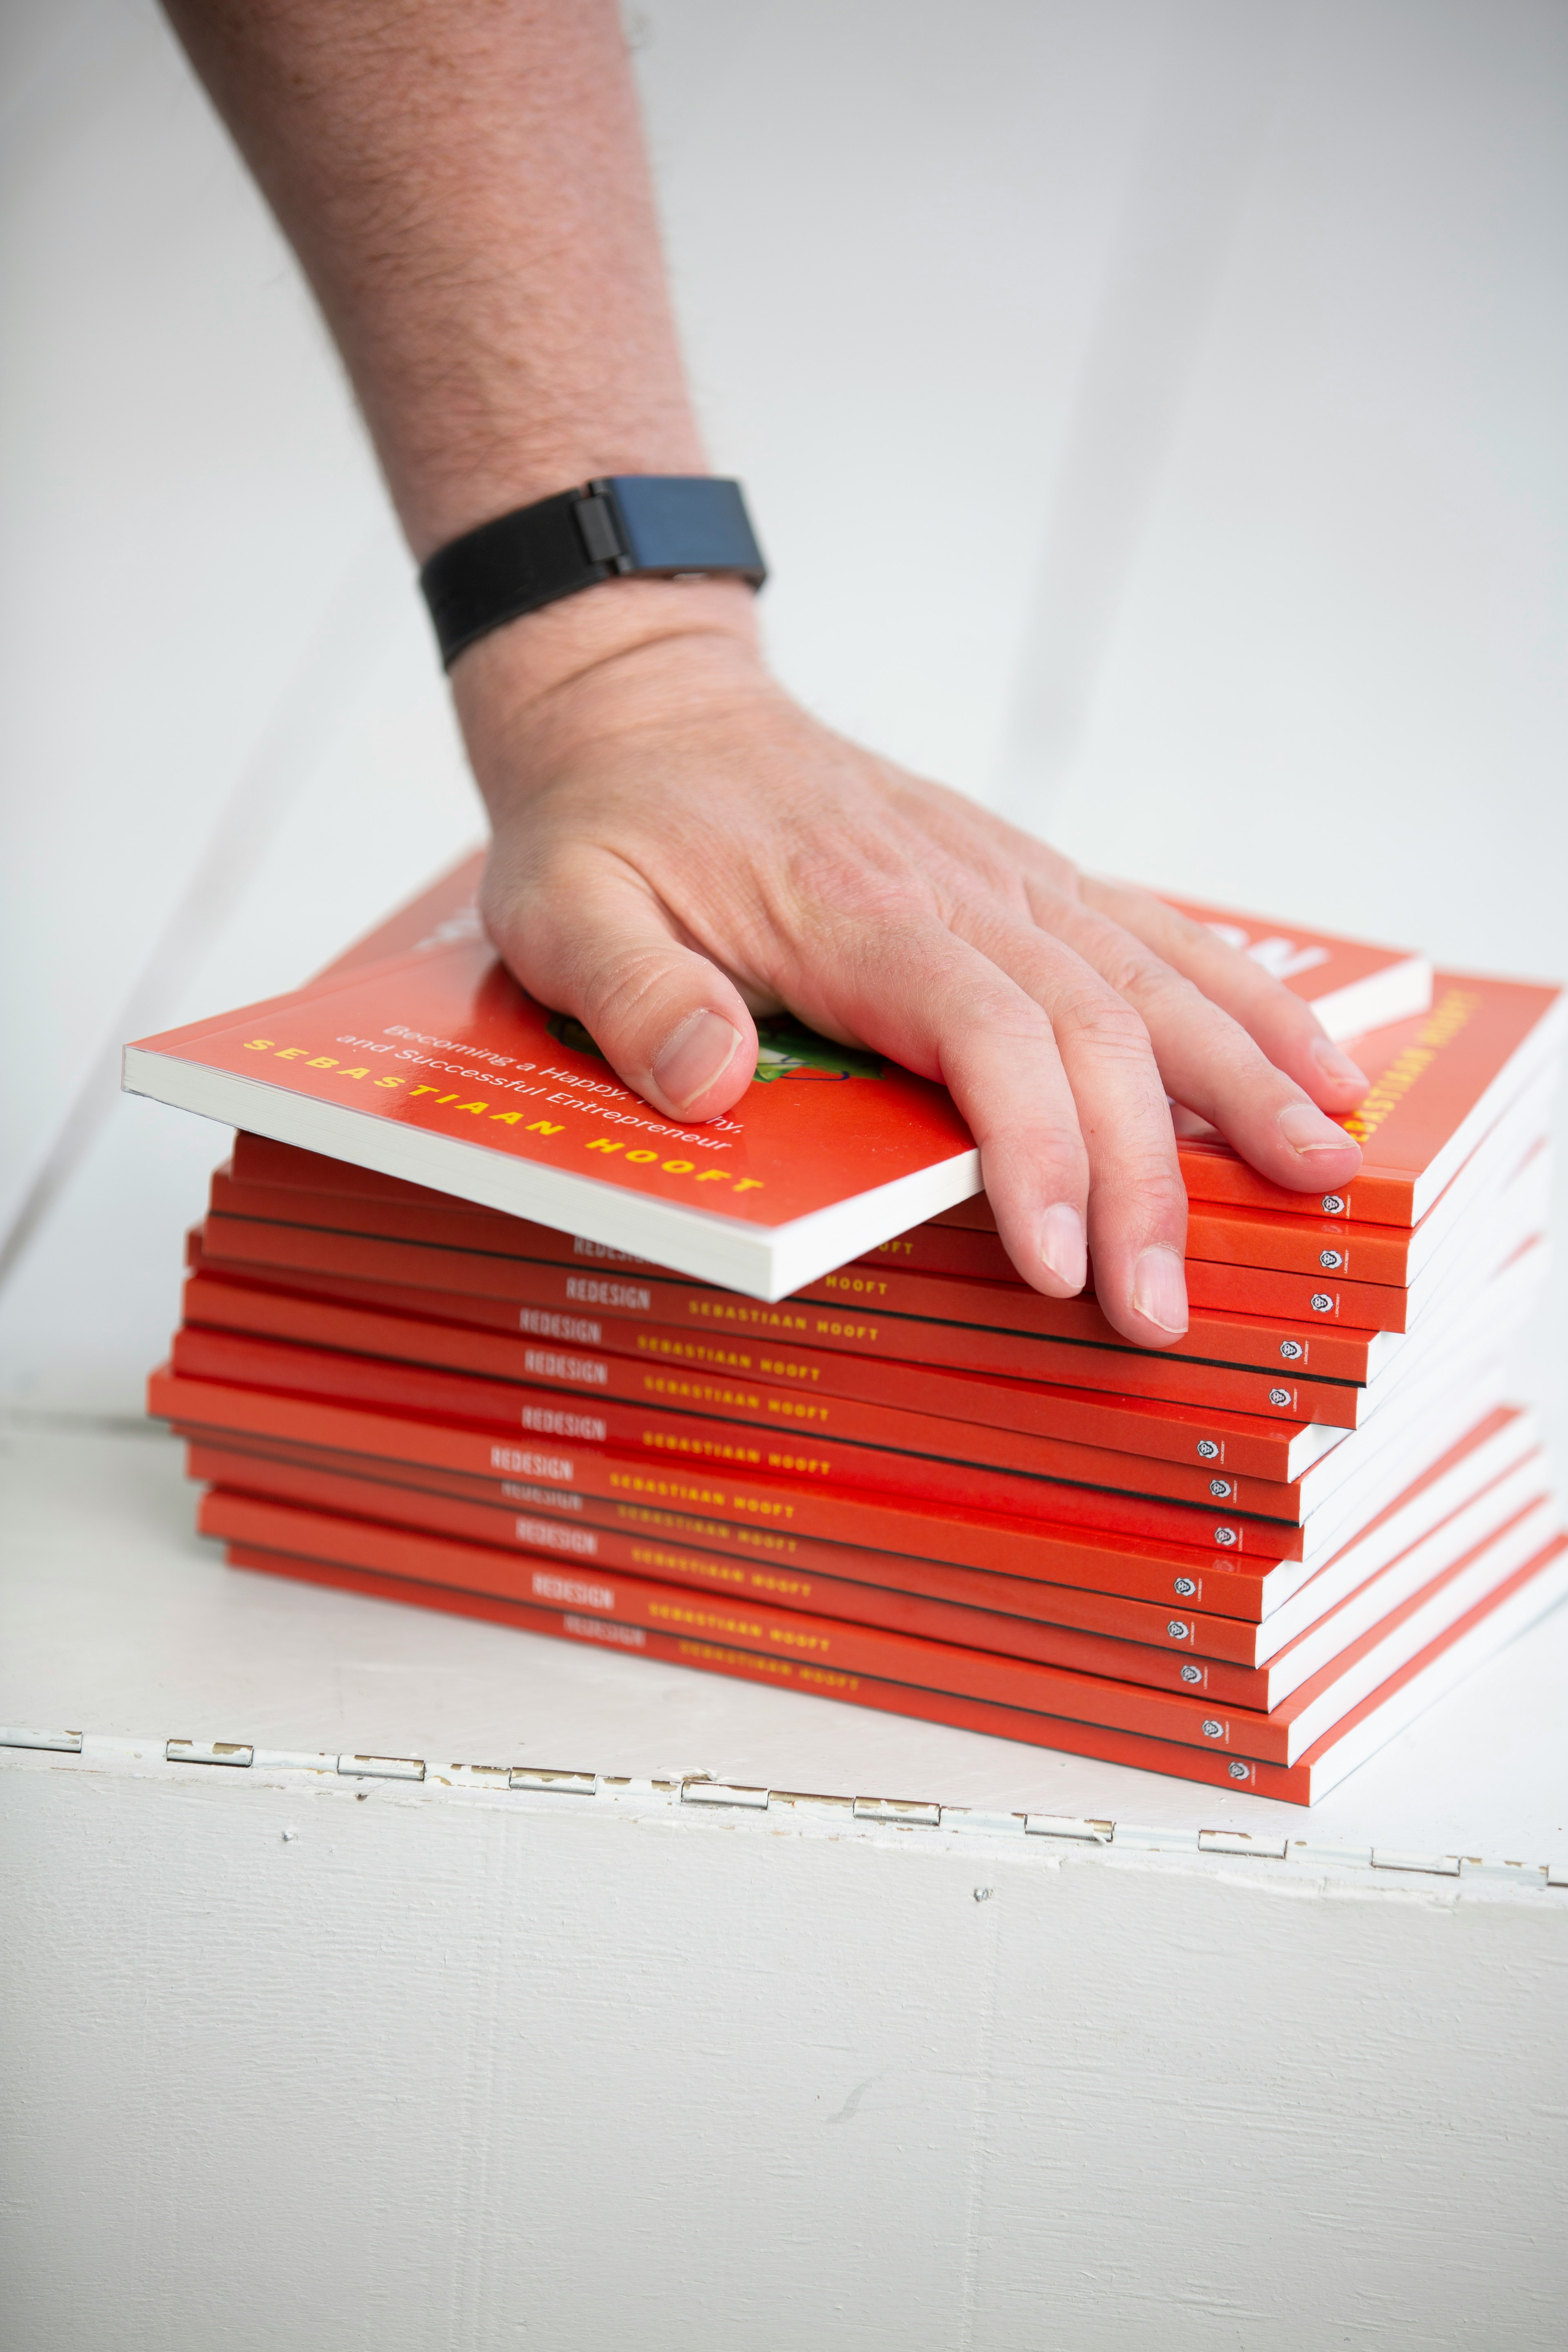 Author Sebastiaan Hooft has his hand on a pile of Redesign books, wearing Withings fitness tracker.